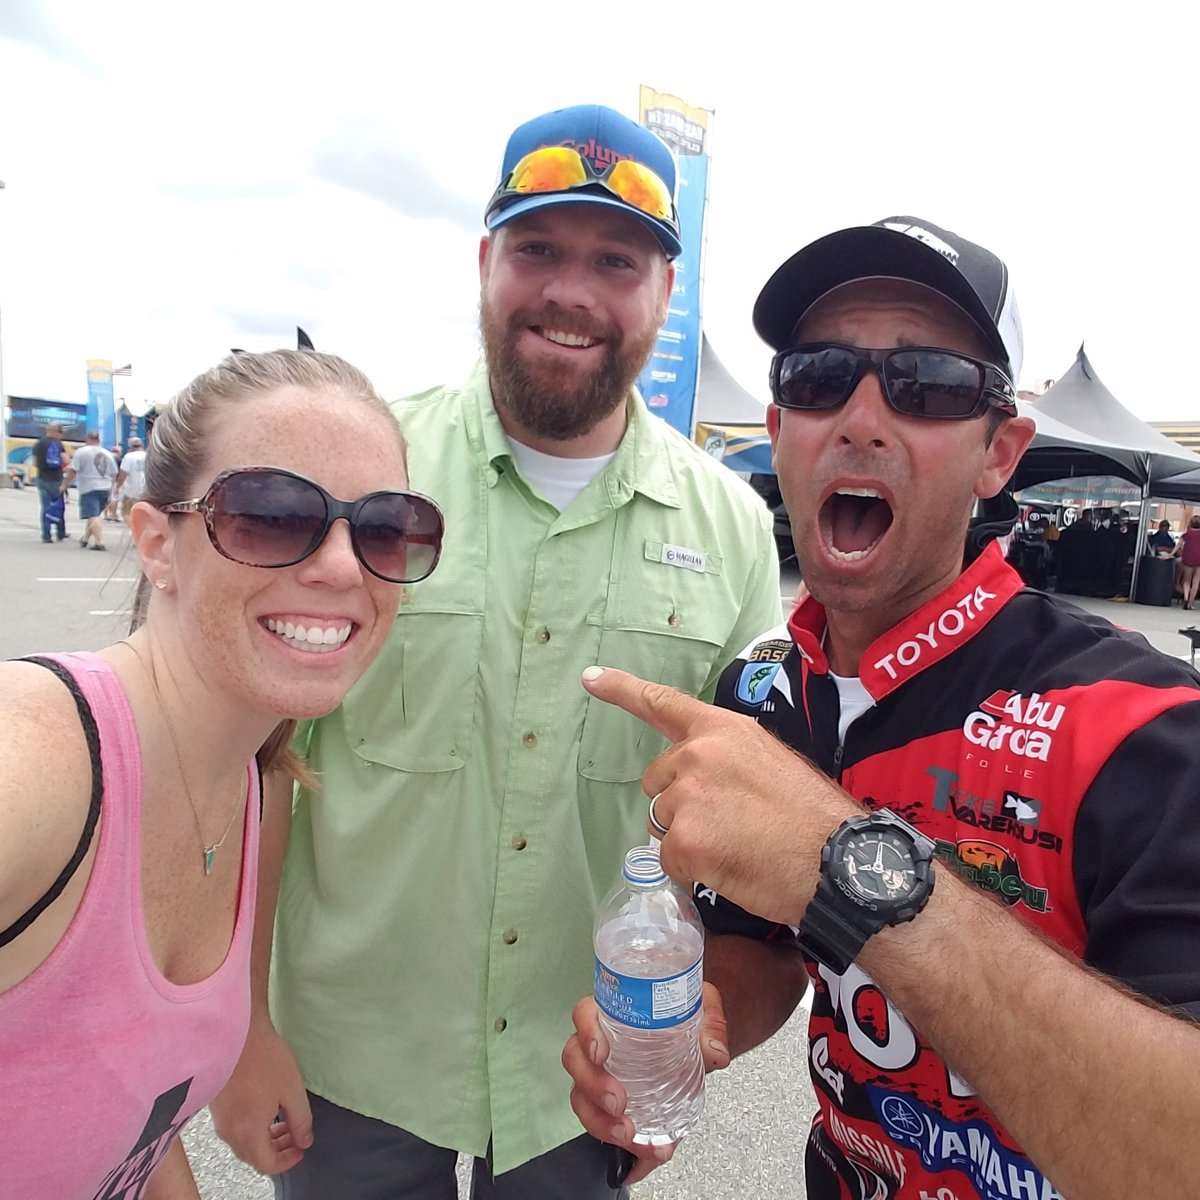 @TBangler tweeted this photo with the caption: I think @mike_Iaconelli was super pumped to meet us today at #BASSfest !! @BASS_nation #thefeelingwasmutual